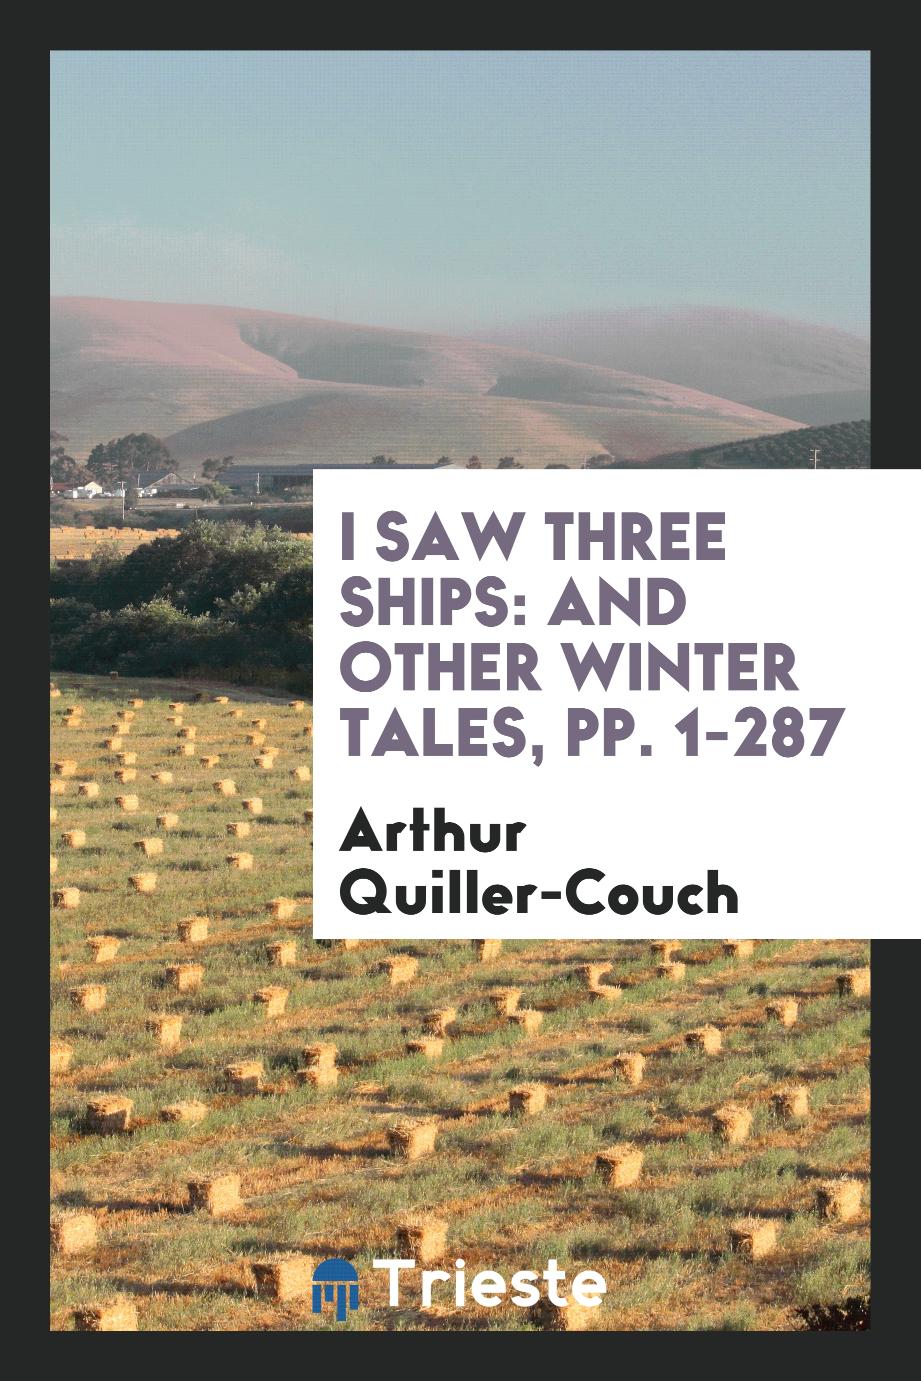 I Saw Three Ships: And Other Winter Tales, pp. 1-287